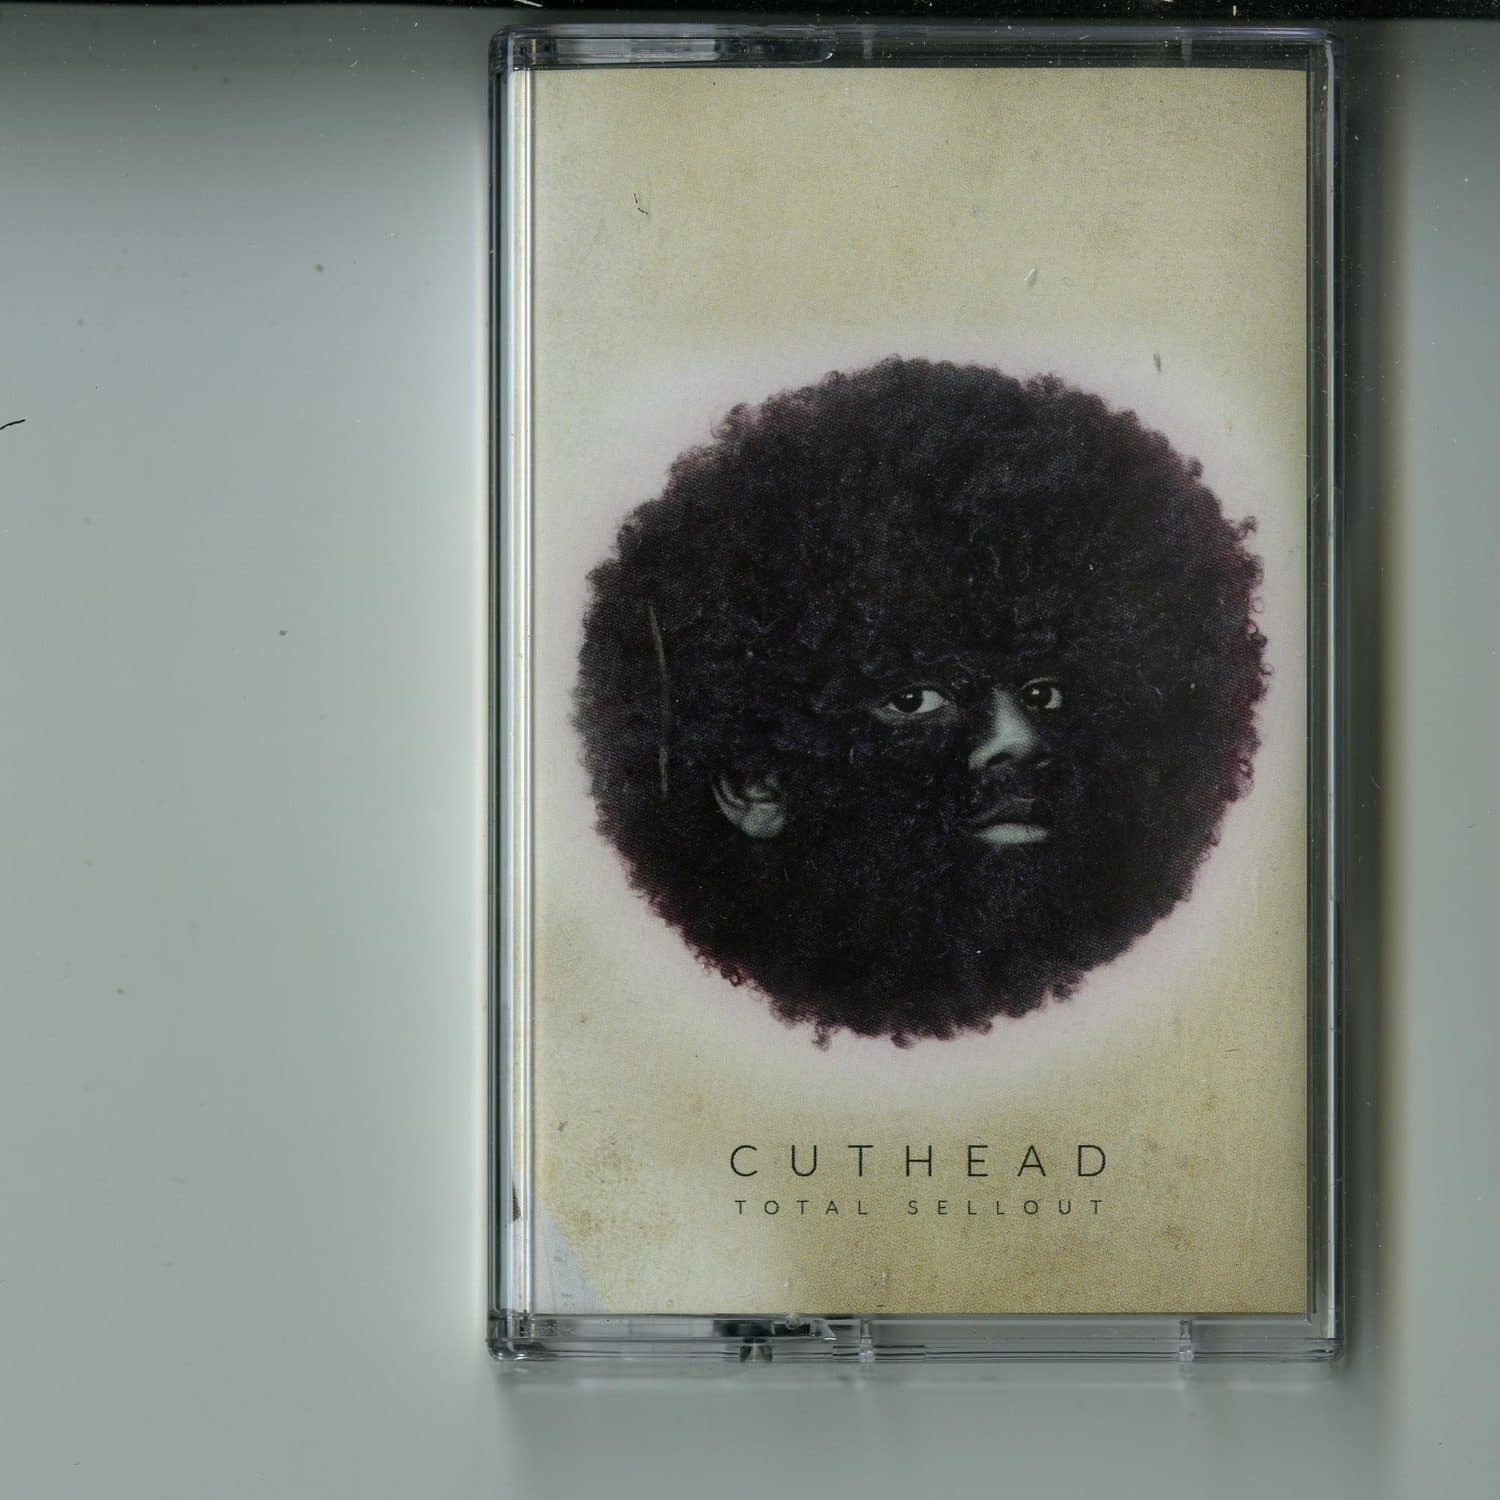 Cuthead - TOTAL SELLOUT 